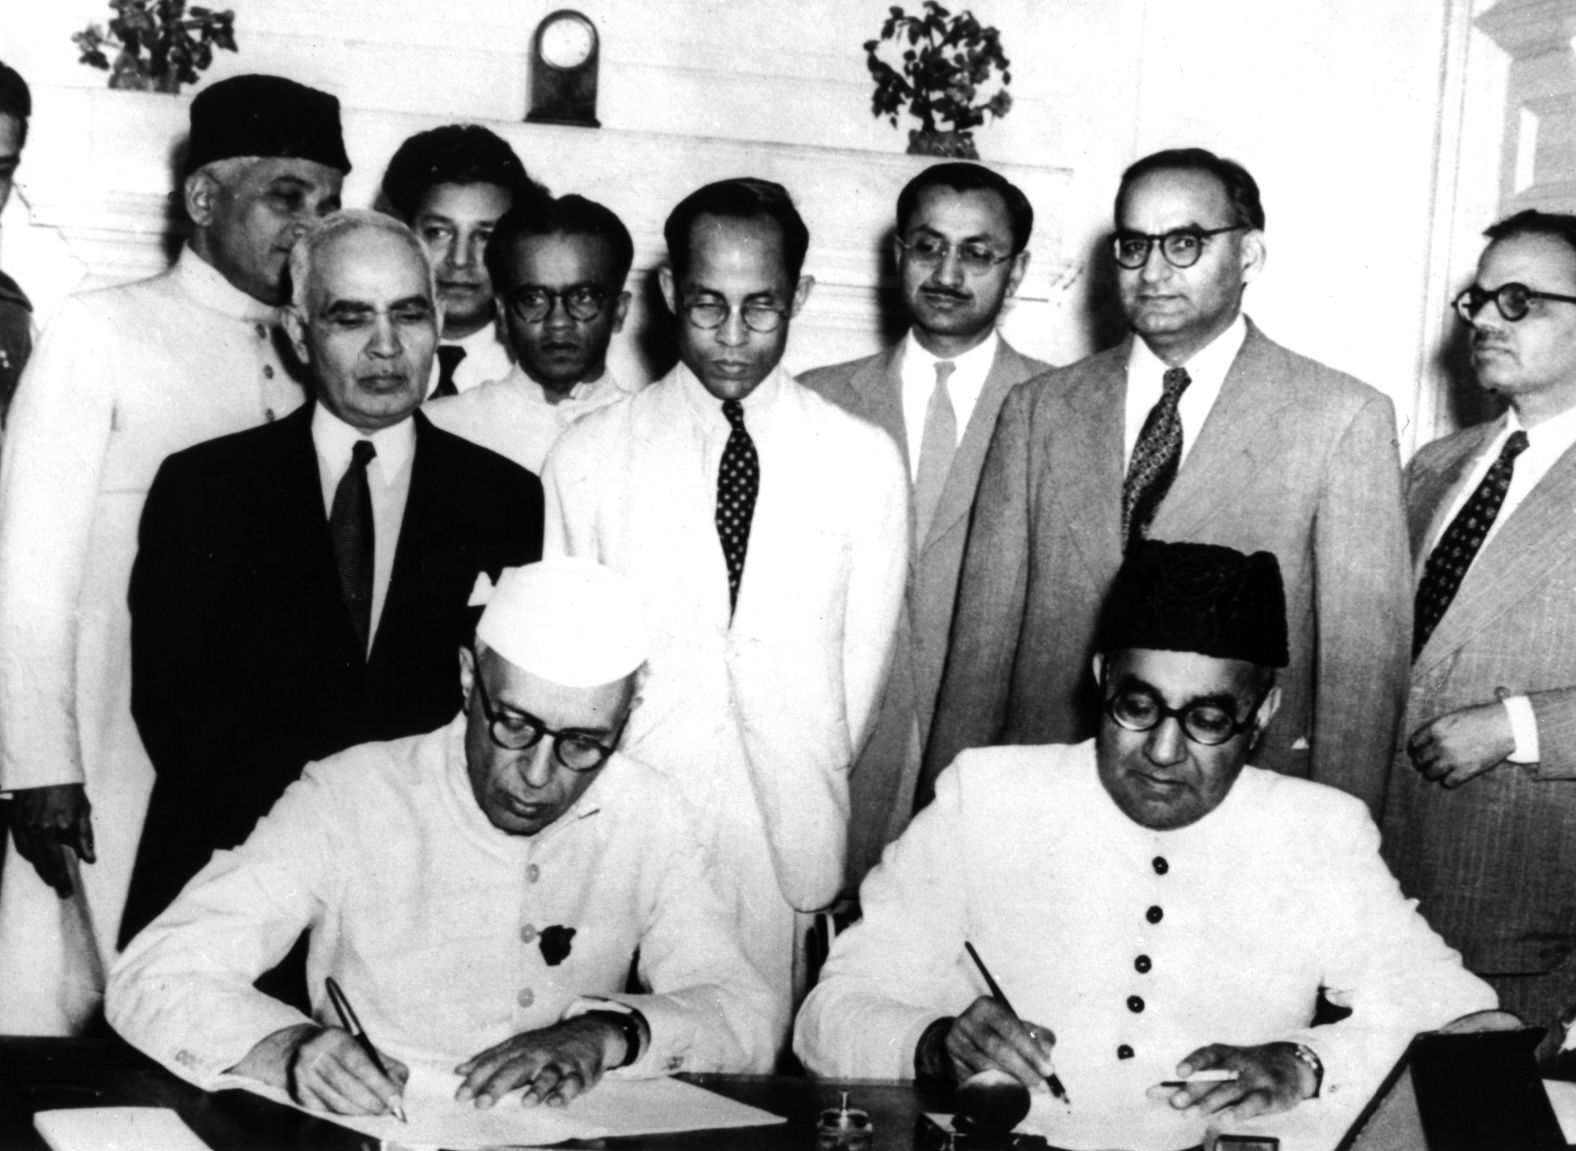 Jawaharlal Nehru and Pakistan's Prime Minister Liaquat Ali Khan, during the signing of the agreement between India and Pakistan in New Delhi, 1947. The agreement would safeguard the rights of minorities in both nations. 